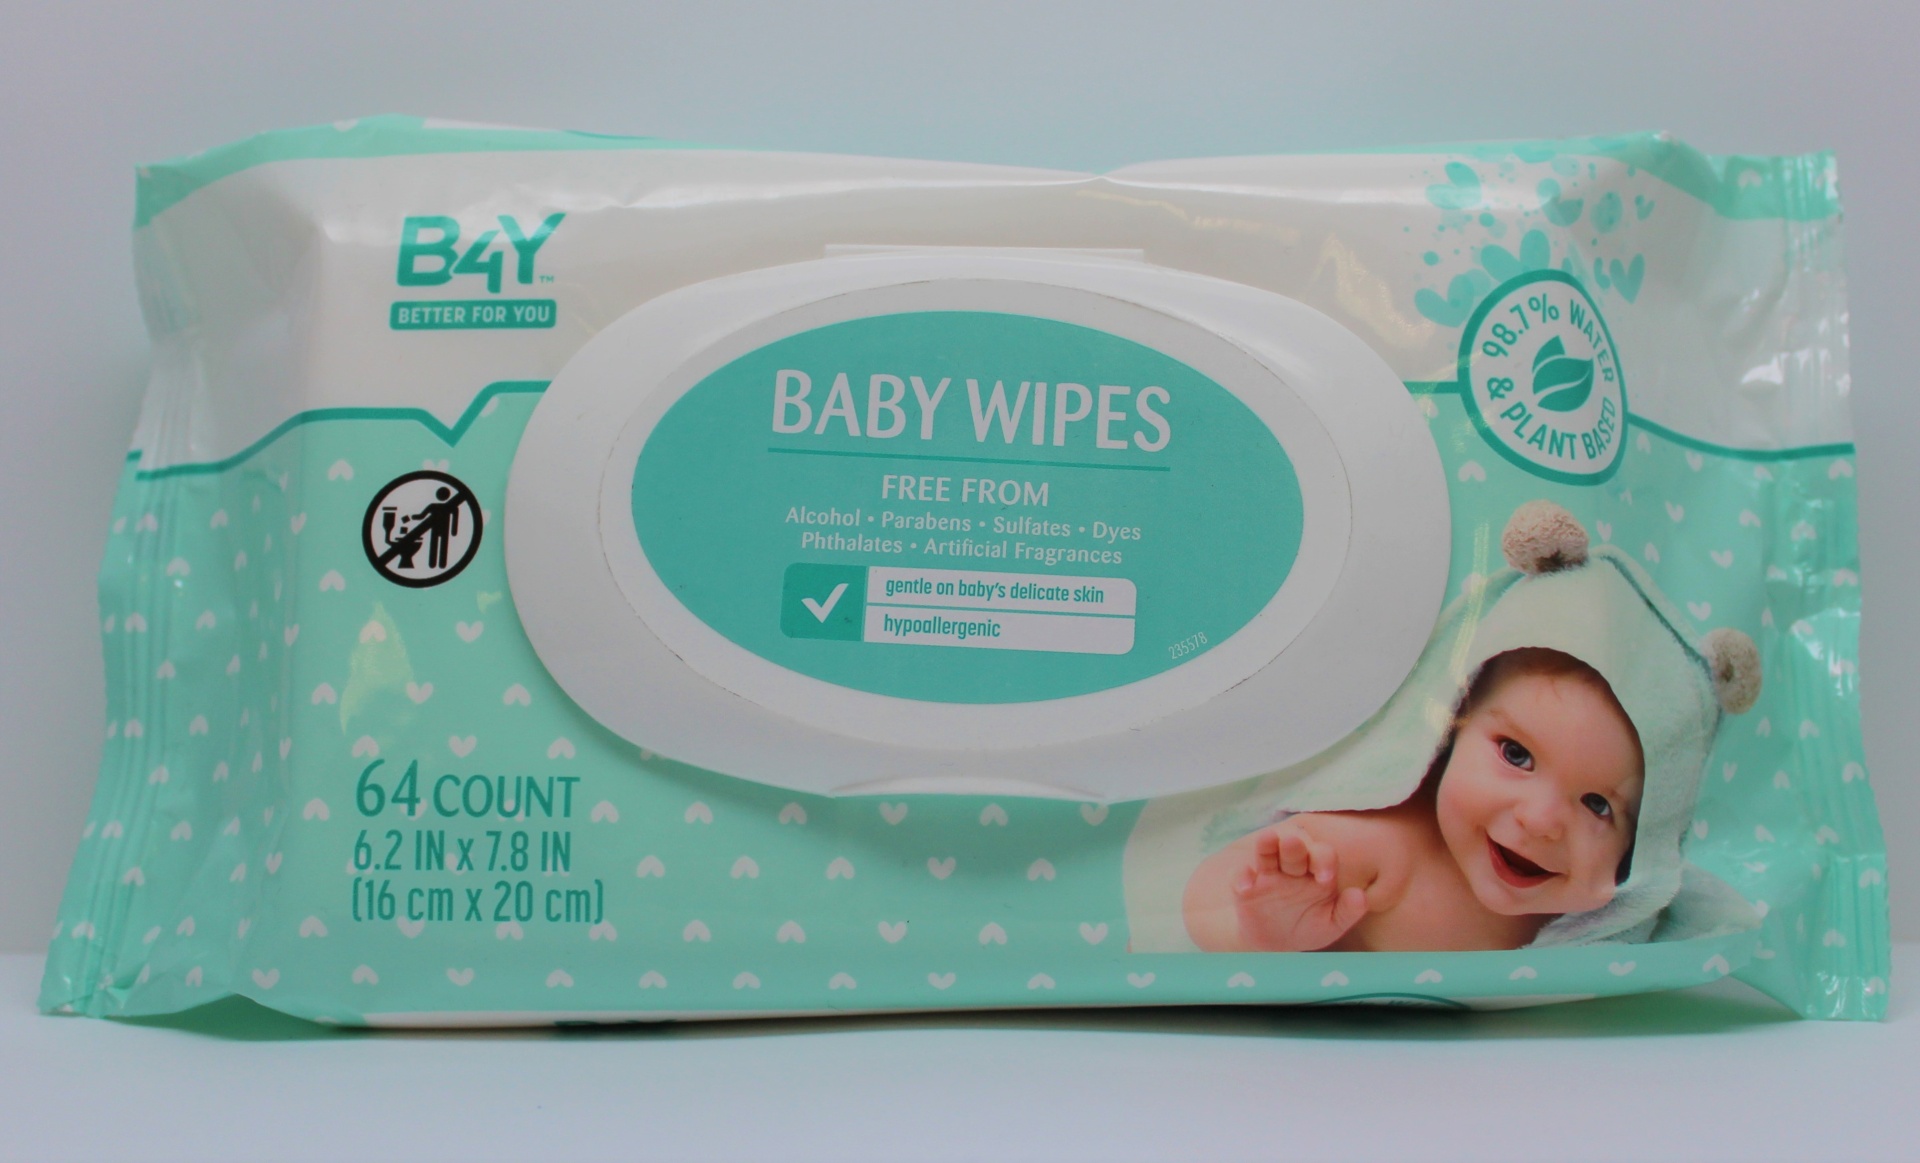 slide 1 of 1, B4Y Better For You Baby Wipes, 64 ct